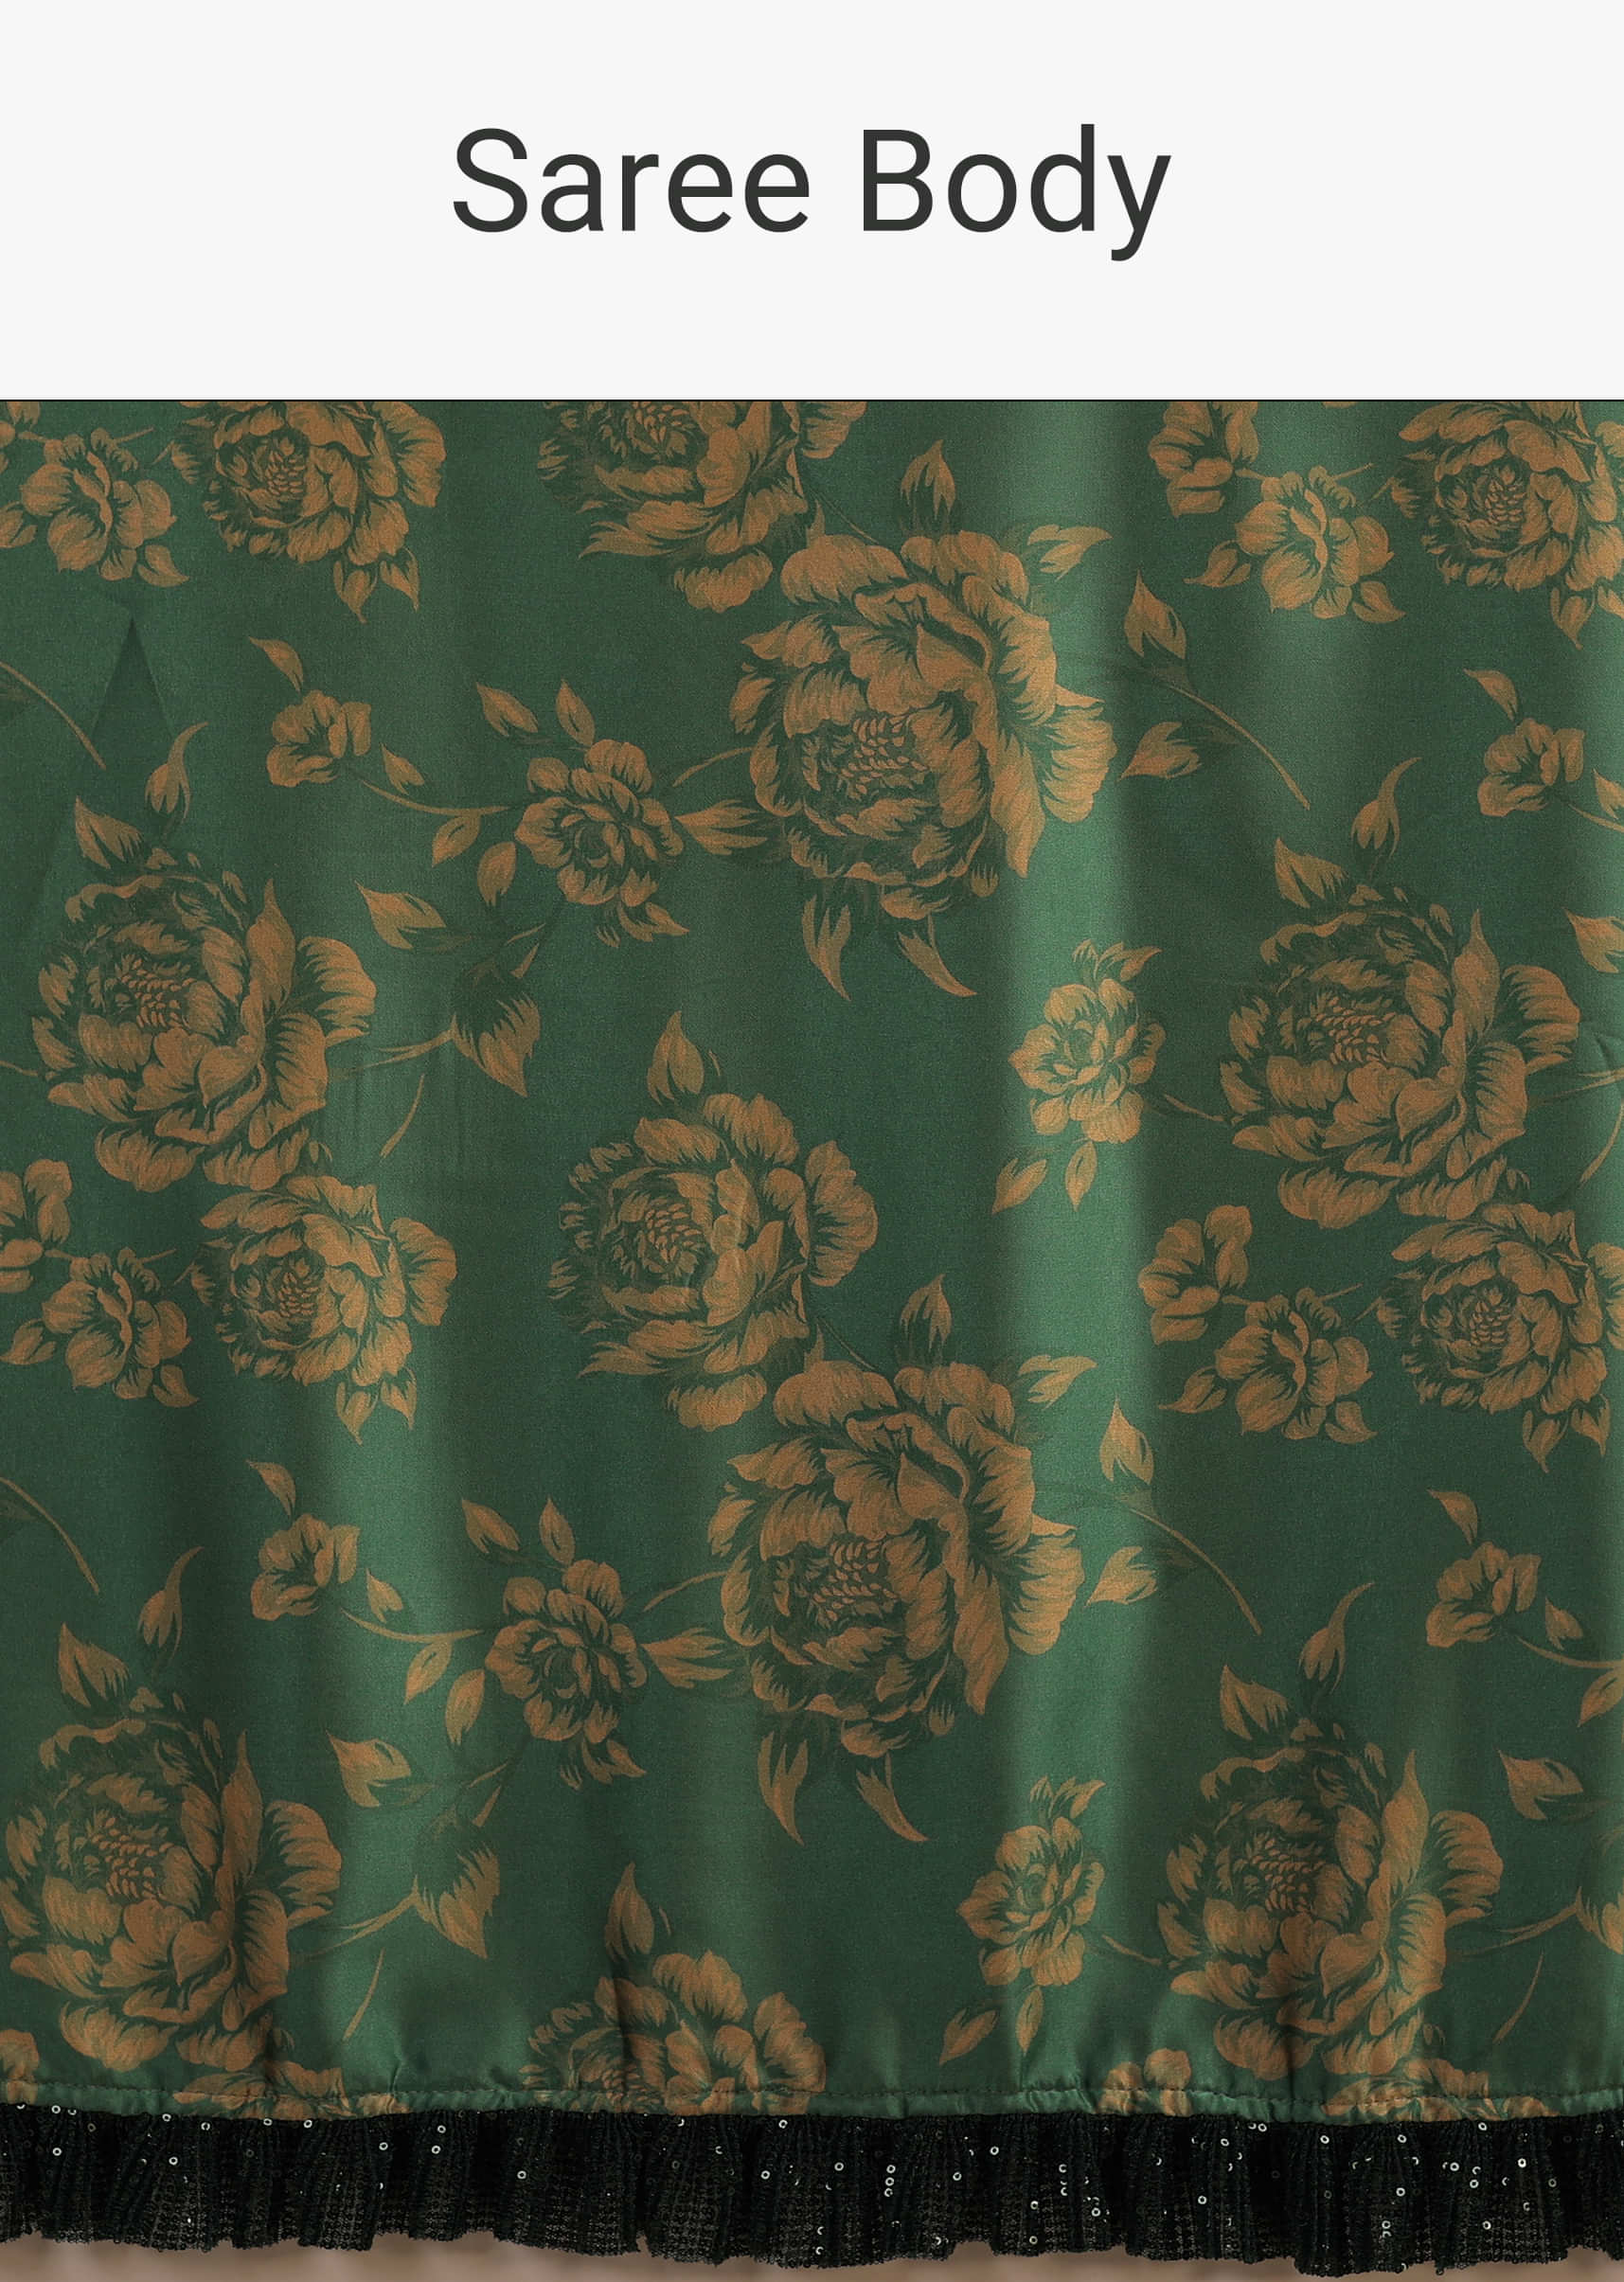 Beryl Green Satin Saree With Floral Print And Sequin Frill On The Border